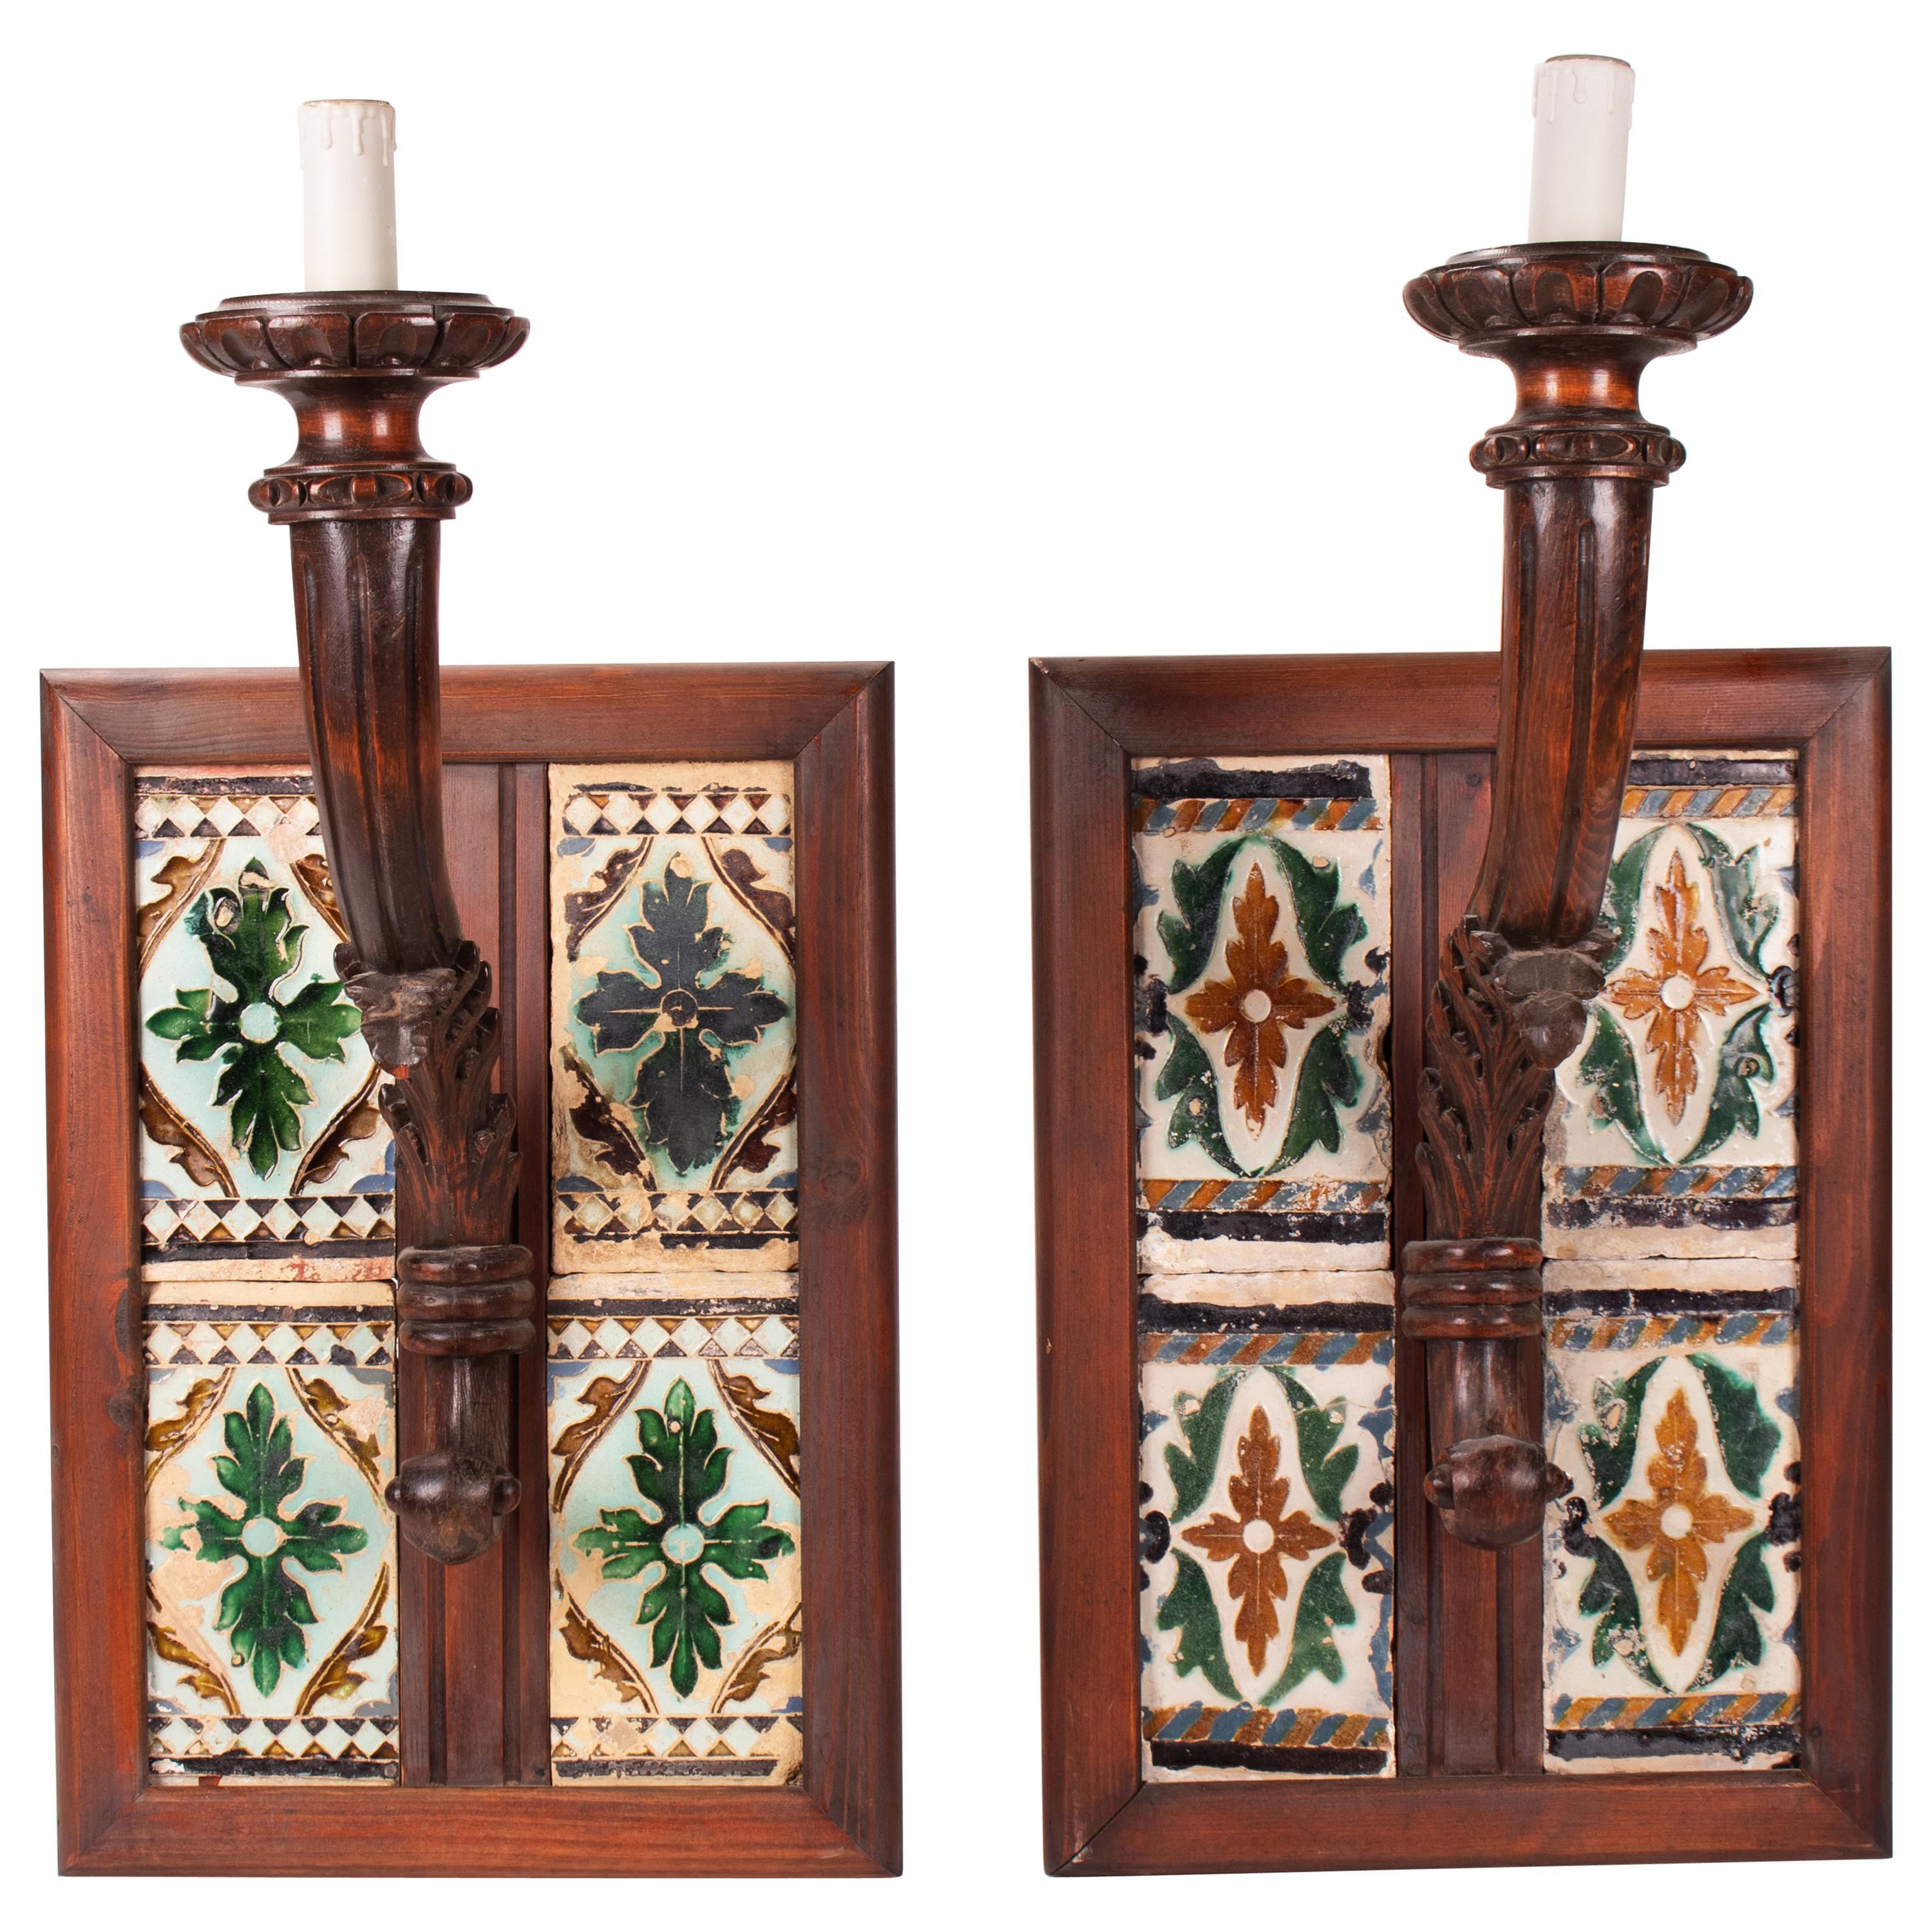 19th Century Pair of Spanish Wall Lamps with 16th Century Cuerda Seca Tiles